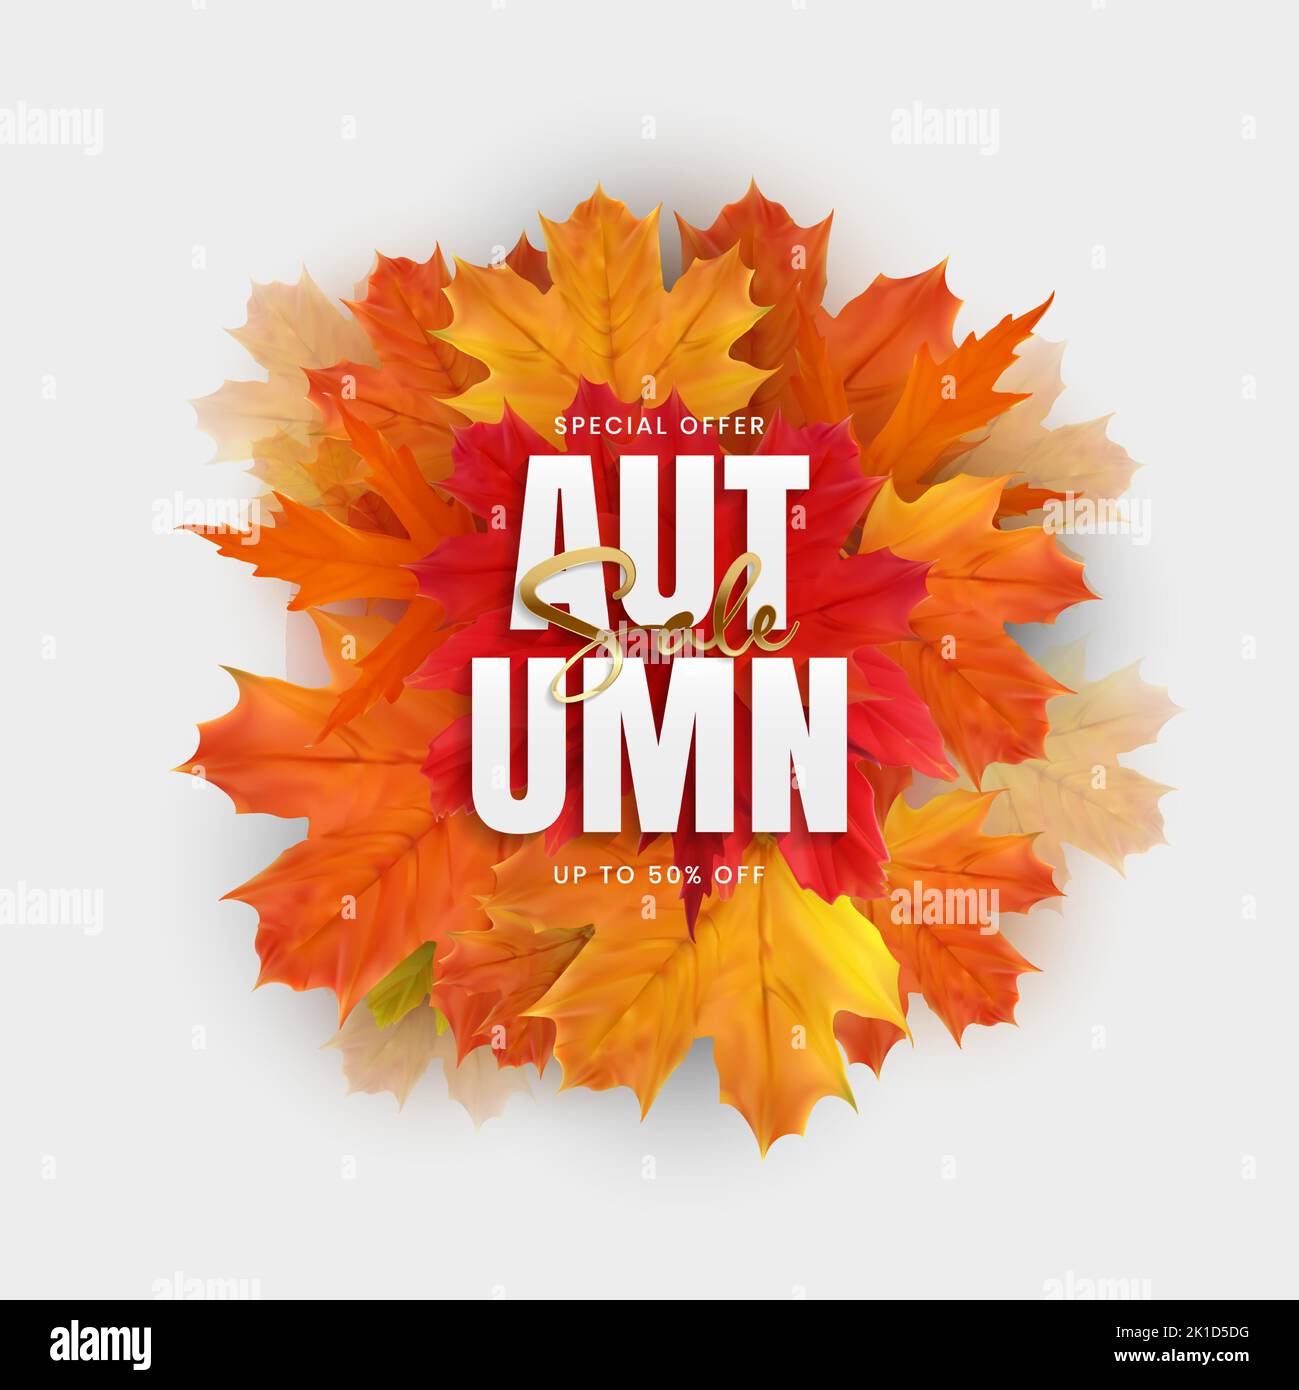 Autumn Sale Poster with Falling Leaves. Vector Illustration Stock Vector